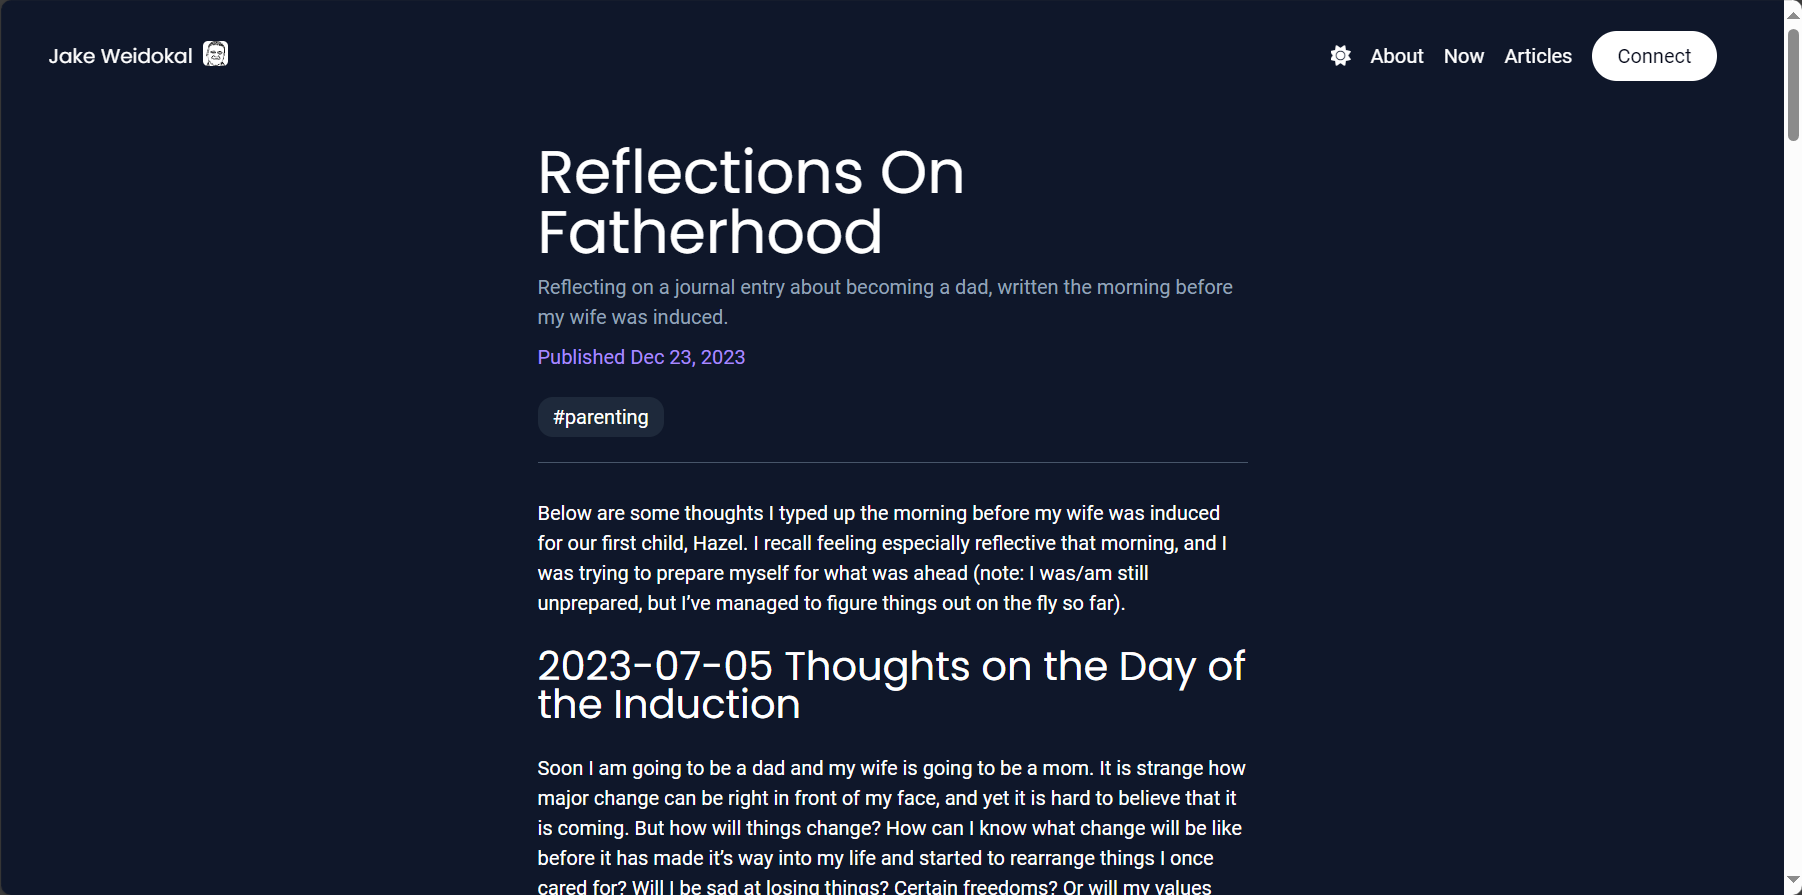 The page for a single article. The article displayed is titled Reflections on Fatherhood.